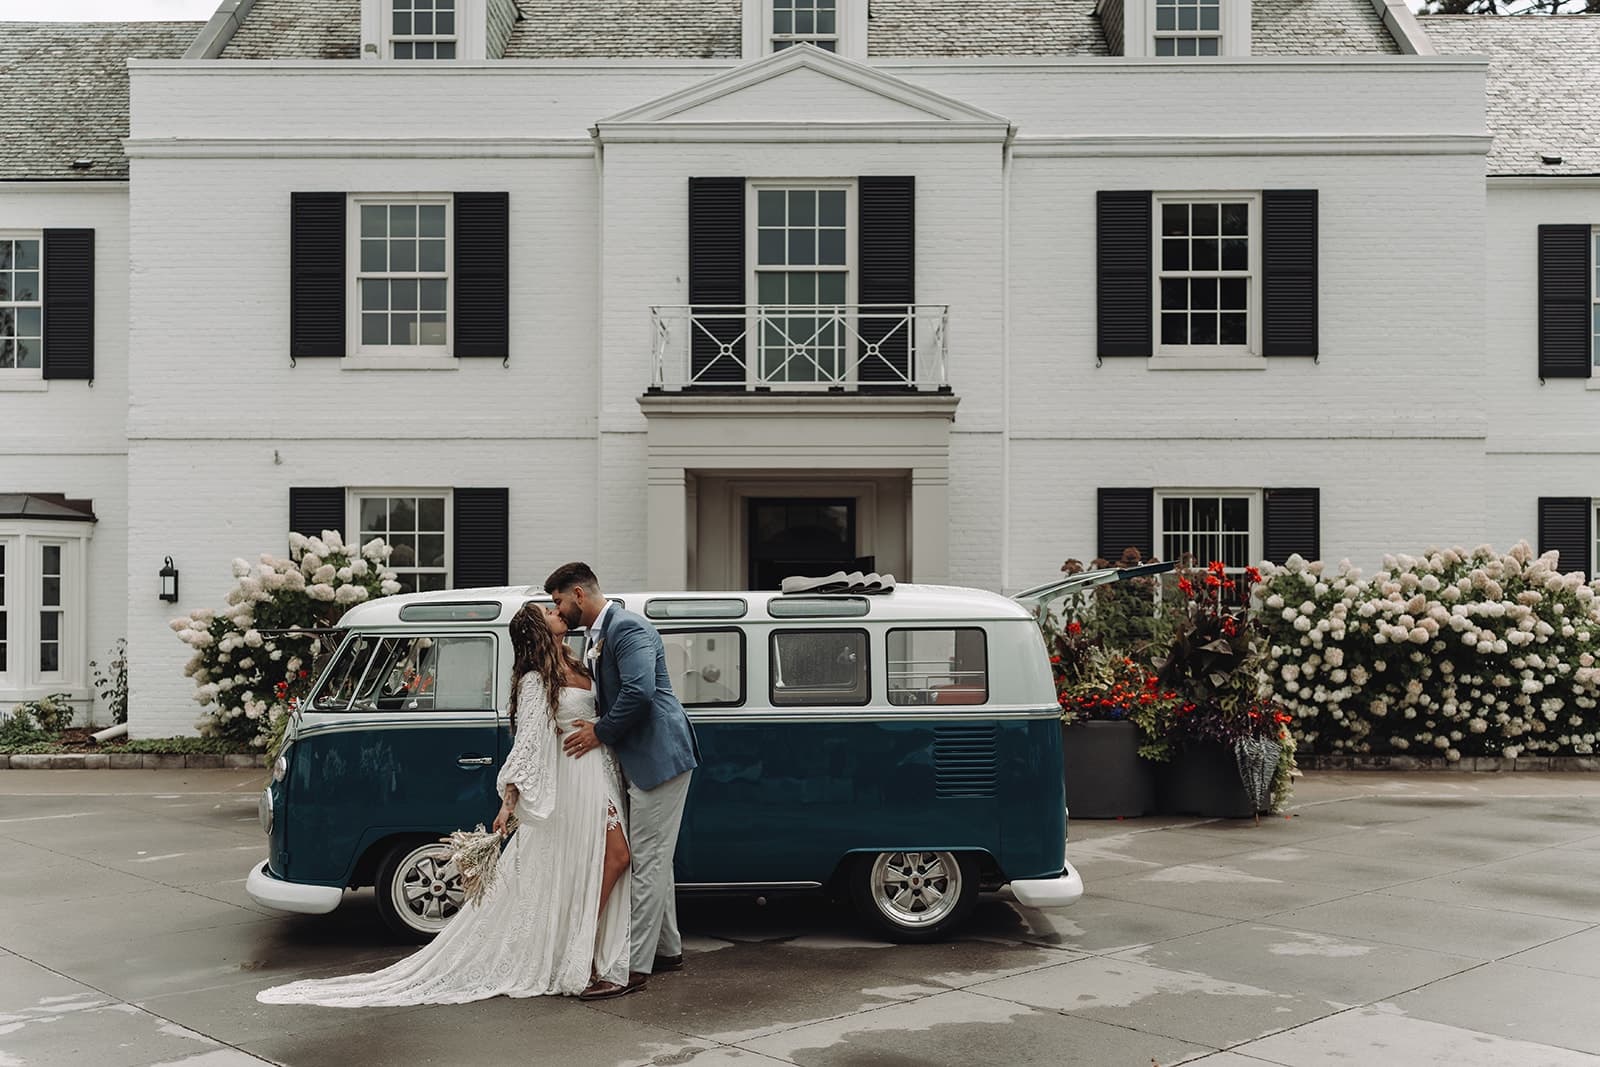 A Story of Love in the Rain: Jenna Marie & Austin's Wedding at Harding Waterfront Estate